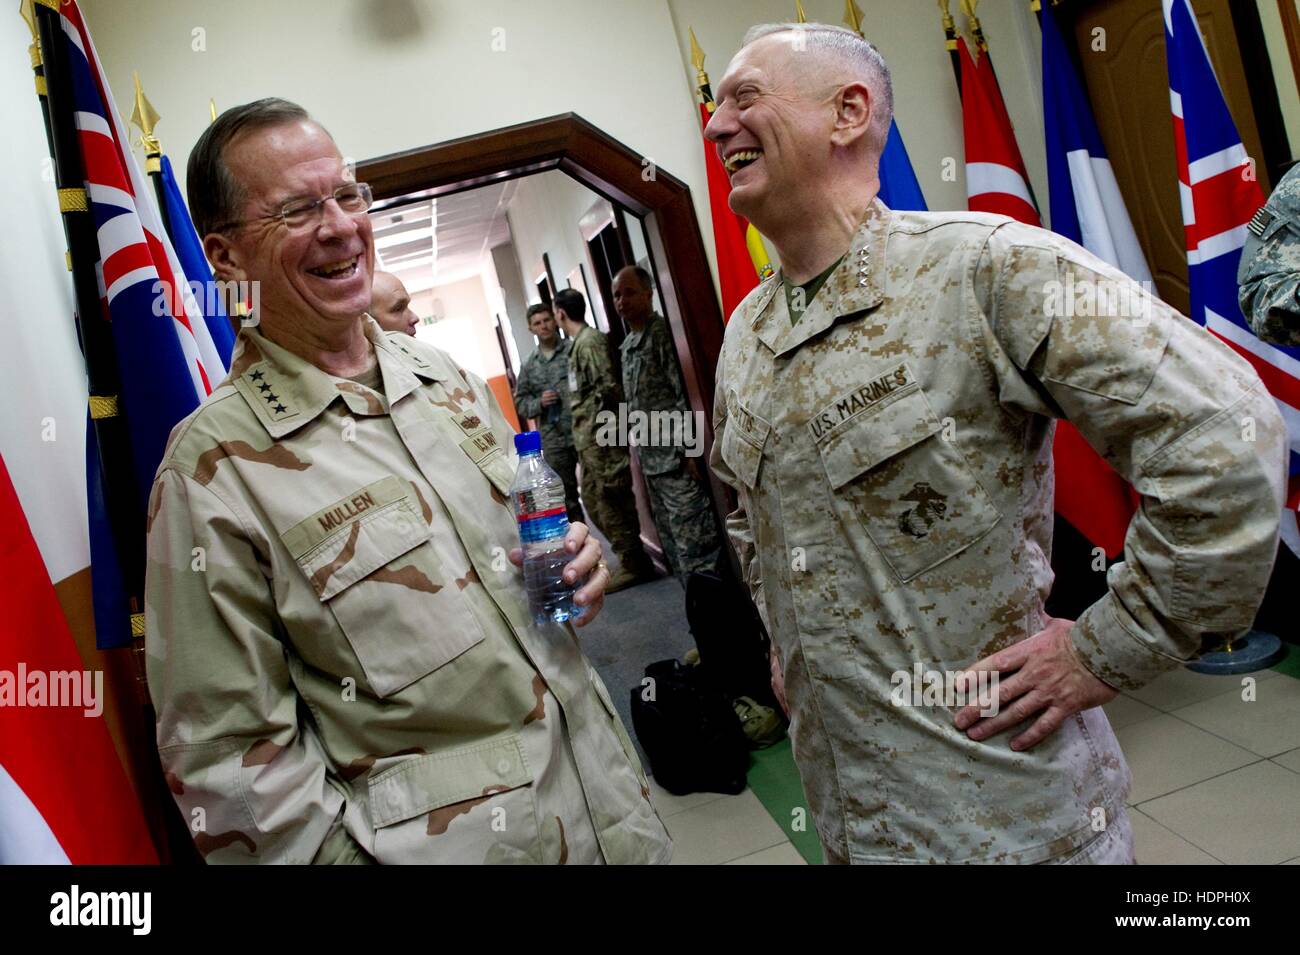 U.S. Joint Chiefs of Staff Chairman Mike Mullen (left) and U.S. Central Command commander James Mattis share a laugh before the International Security Assistance Force change-of-command ceremony at the ISAF Headquarters July 18, 2011 in Kabul, Afghanistan. Stock Photo